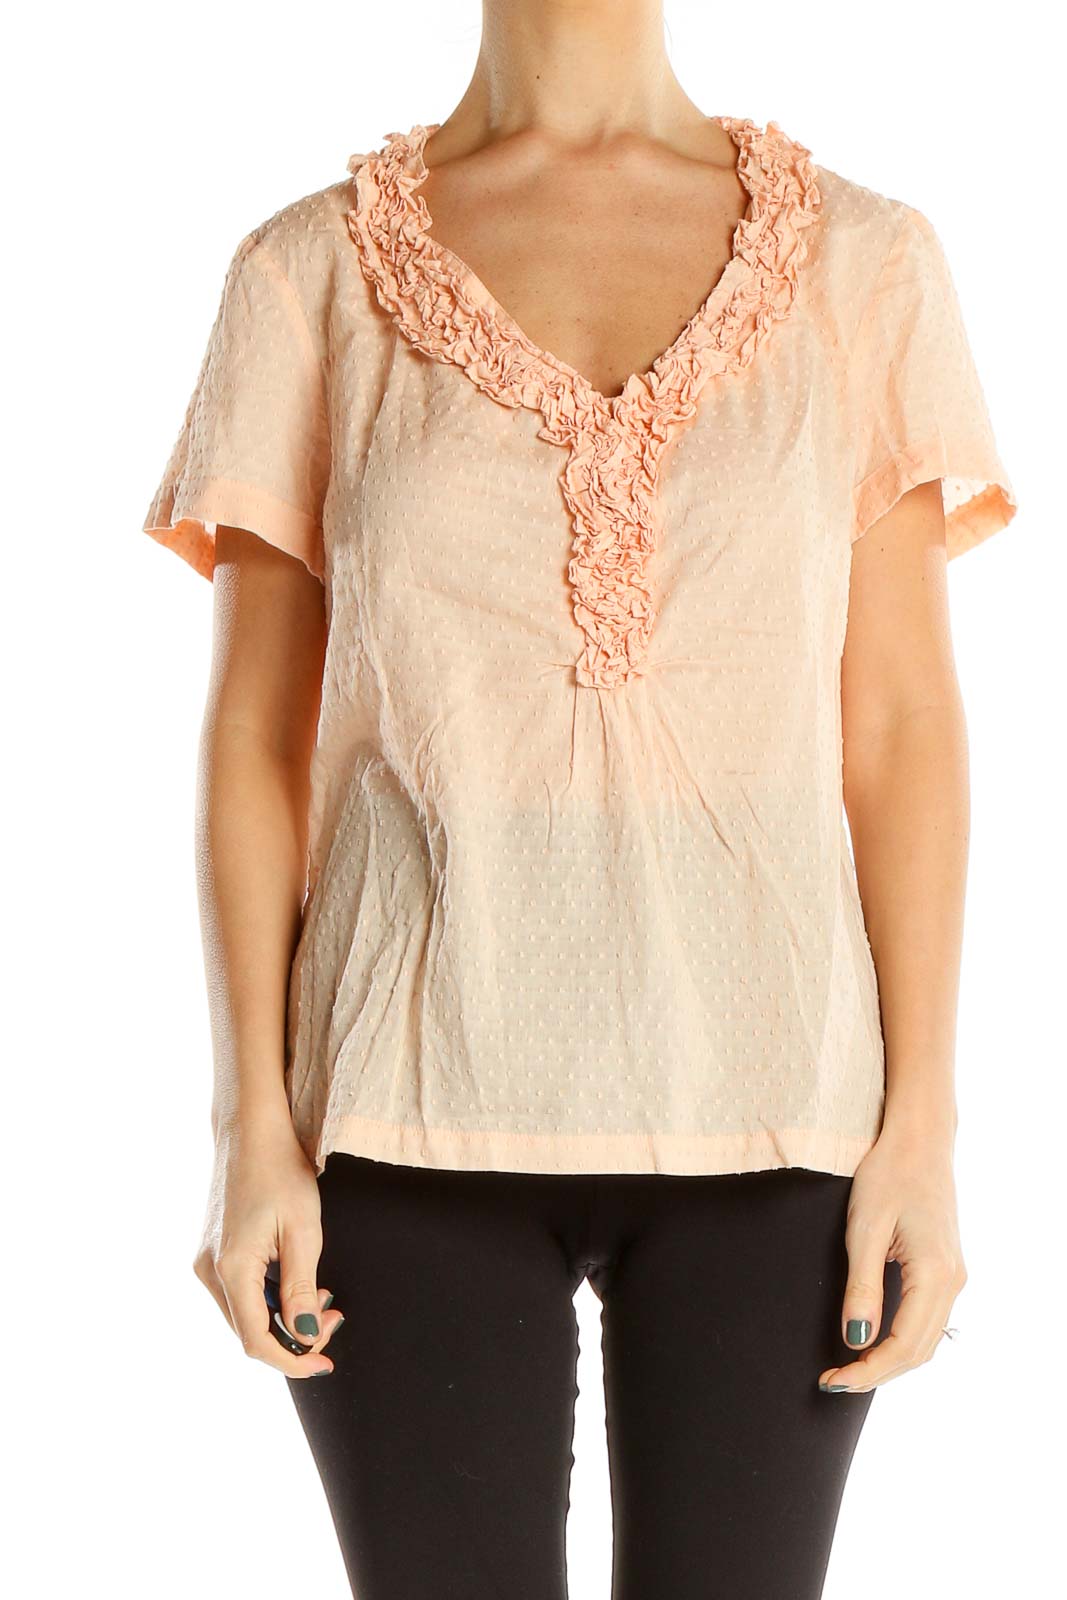 Pink Textured Retro Blouse With Ruffle Neckline Front